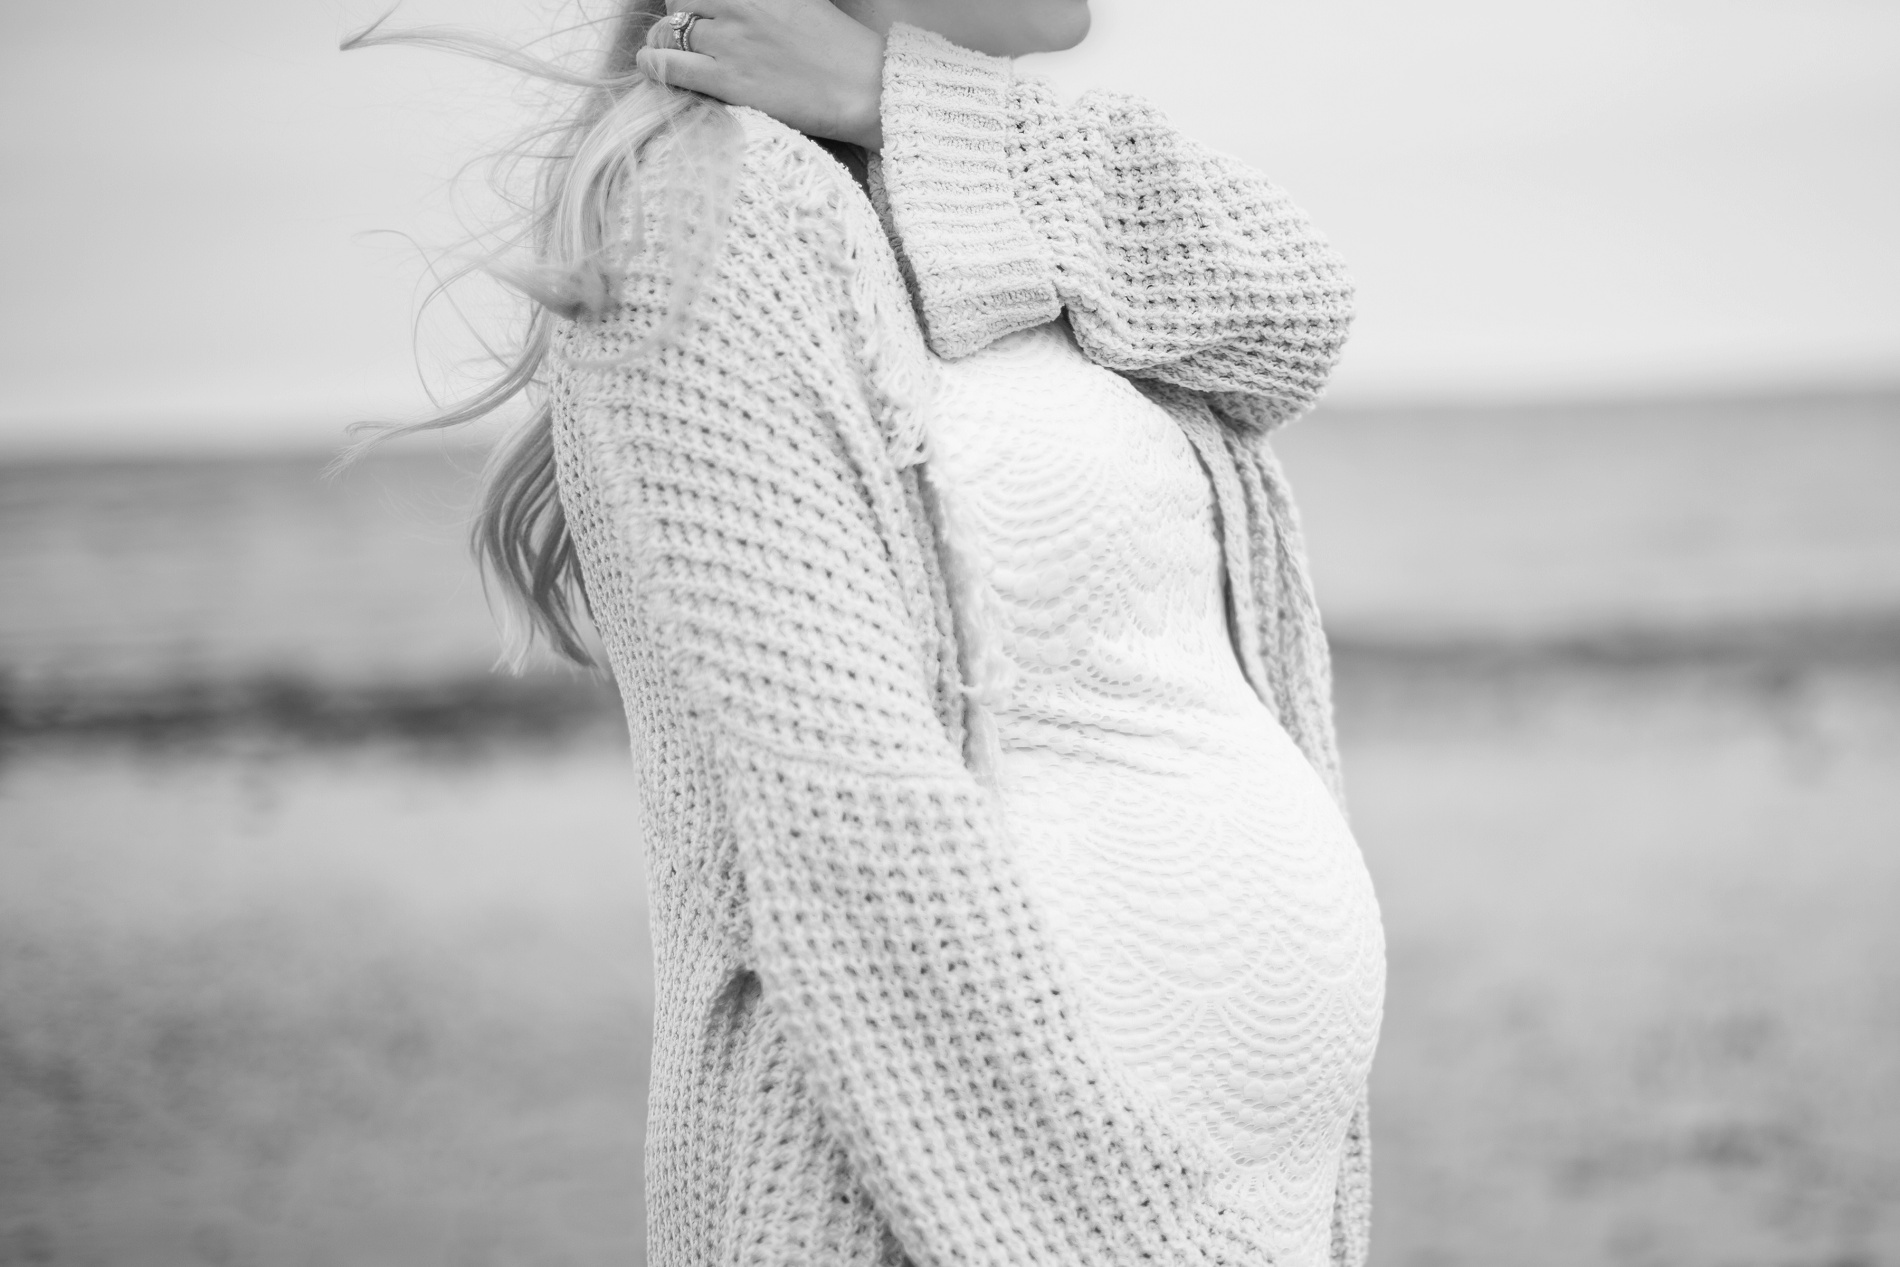 CT Beach Maternity Session by Anne Miller annemillerphotographer.com